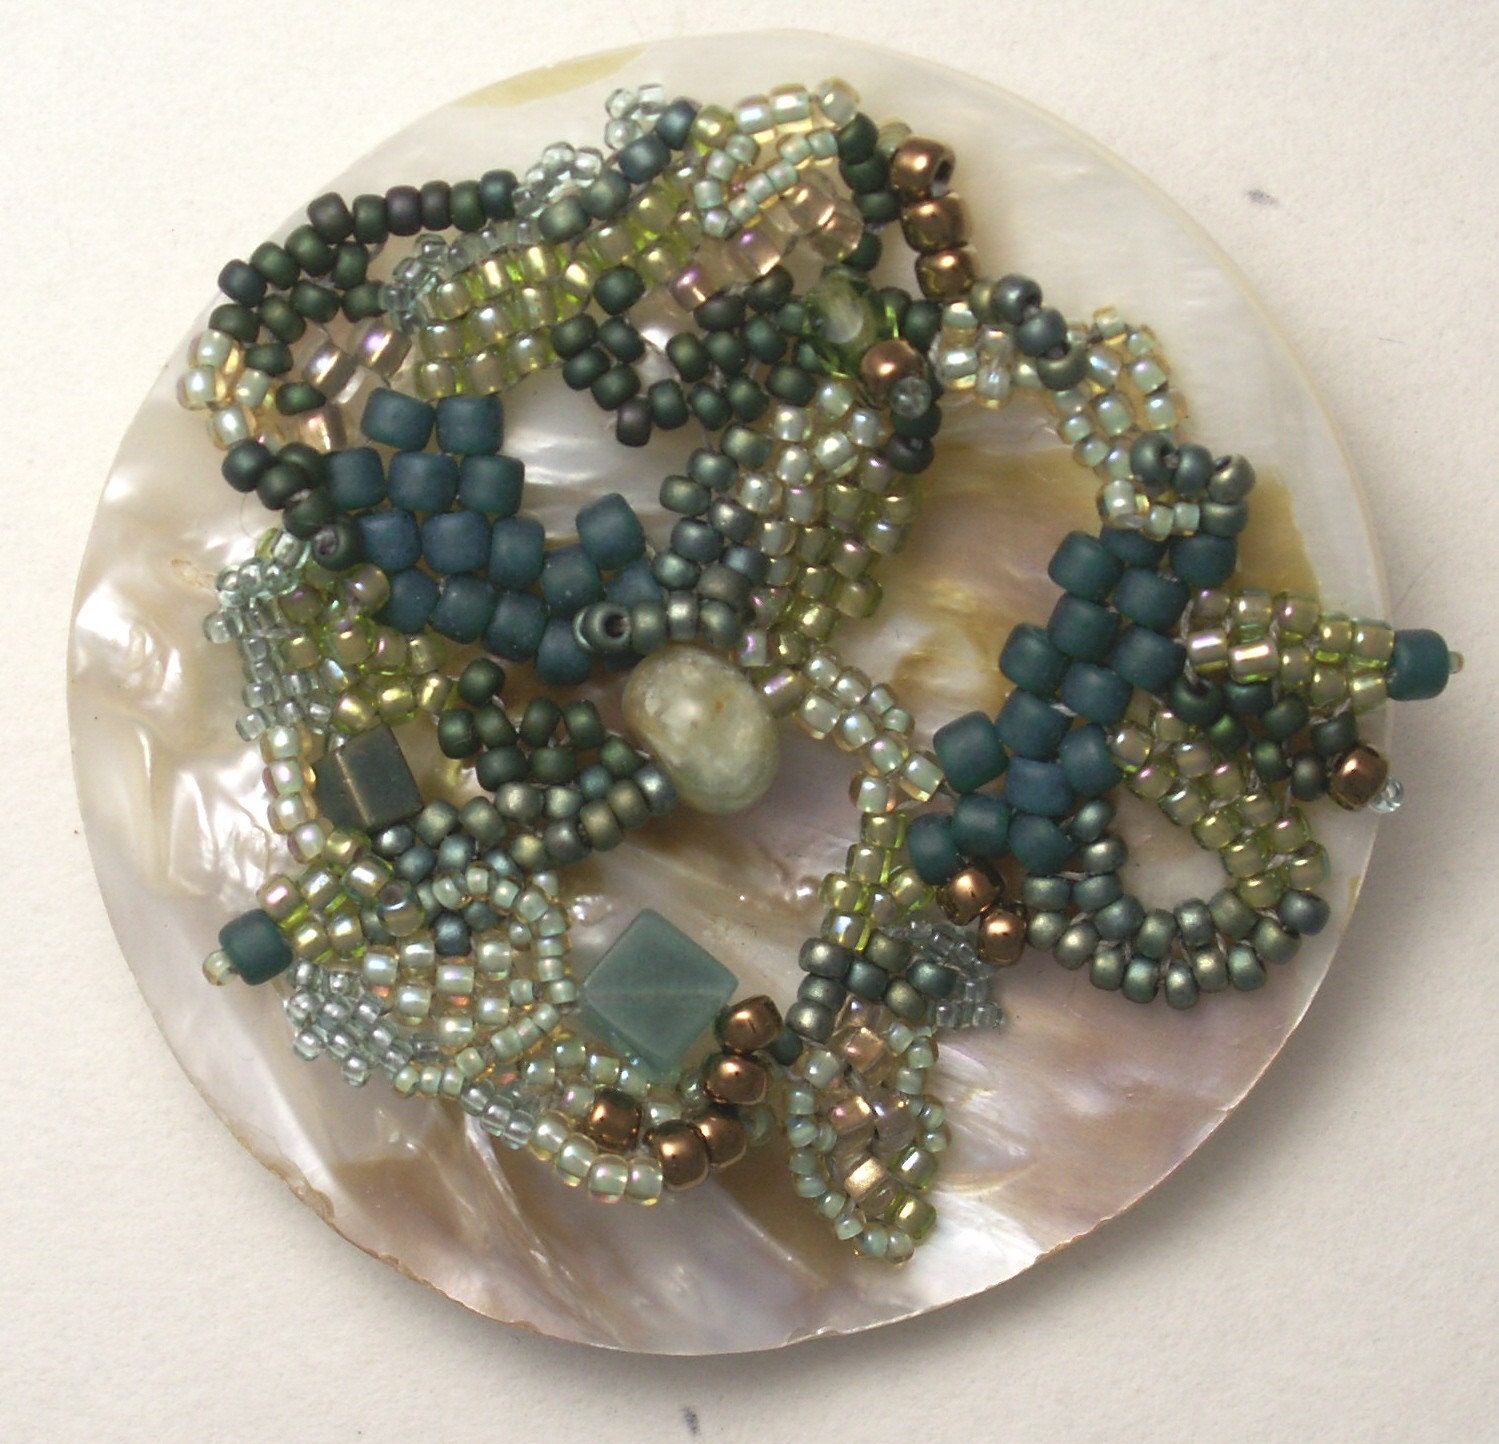 freeform bead weaving mother of pearl seed beads pin brooch pendant